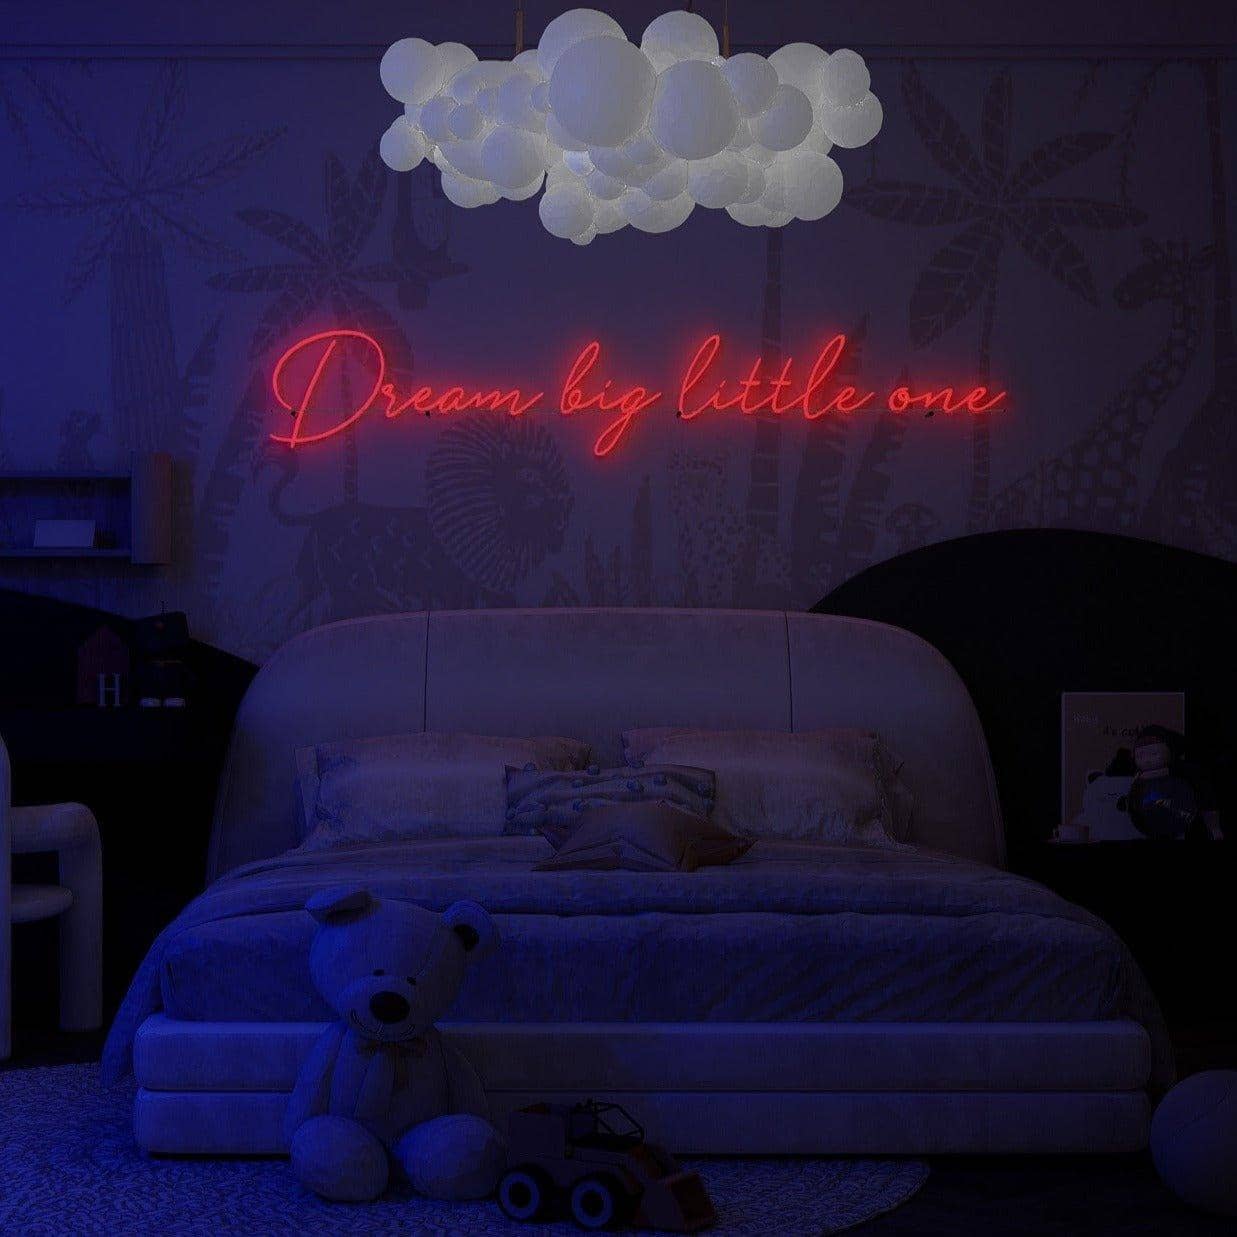 red-neon-lights-are-lit-up-and-displayed-in-the-bedroom-at-night-dream-big-little-one